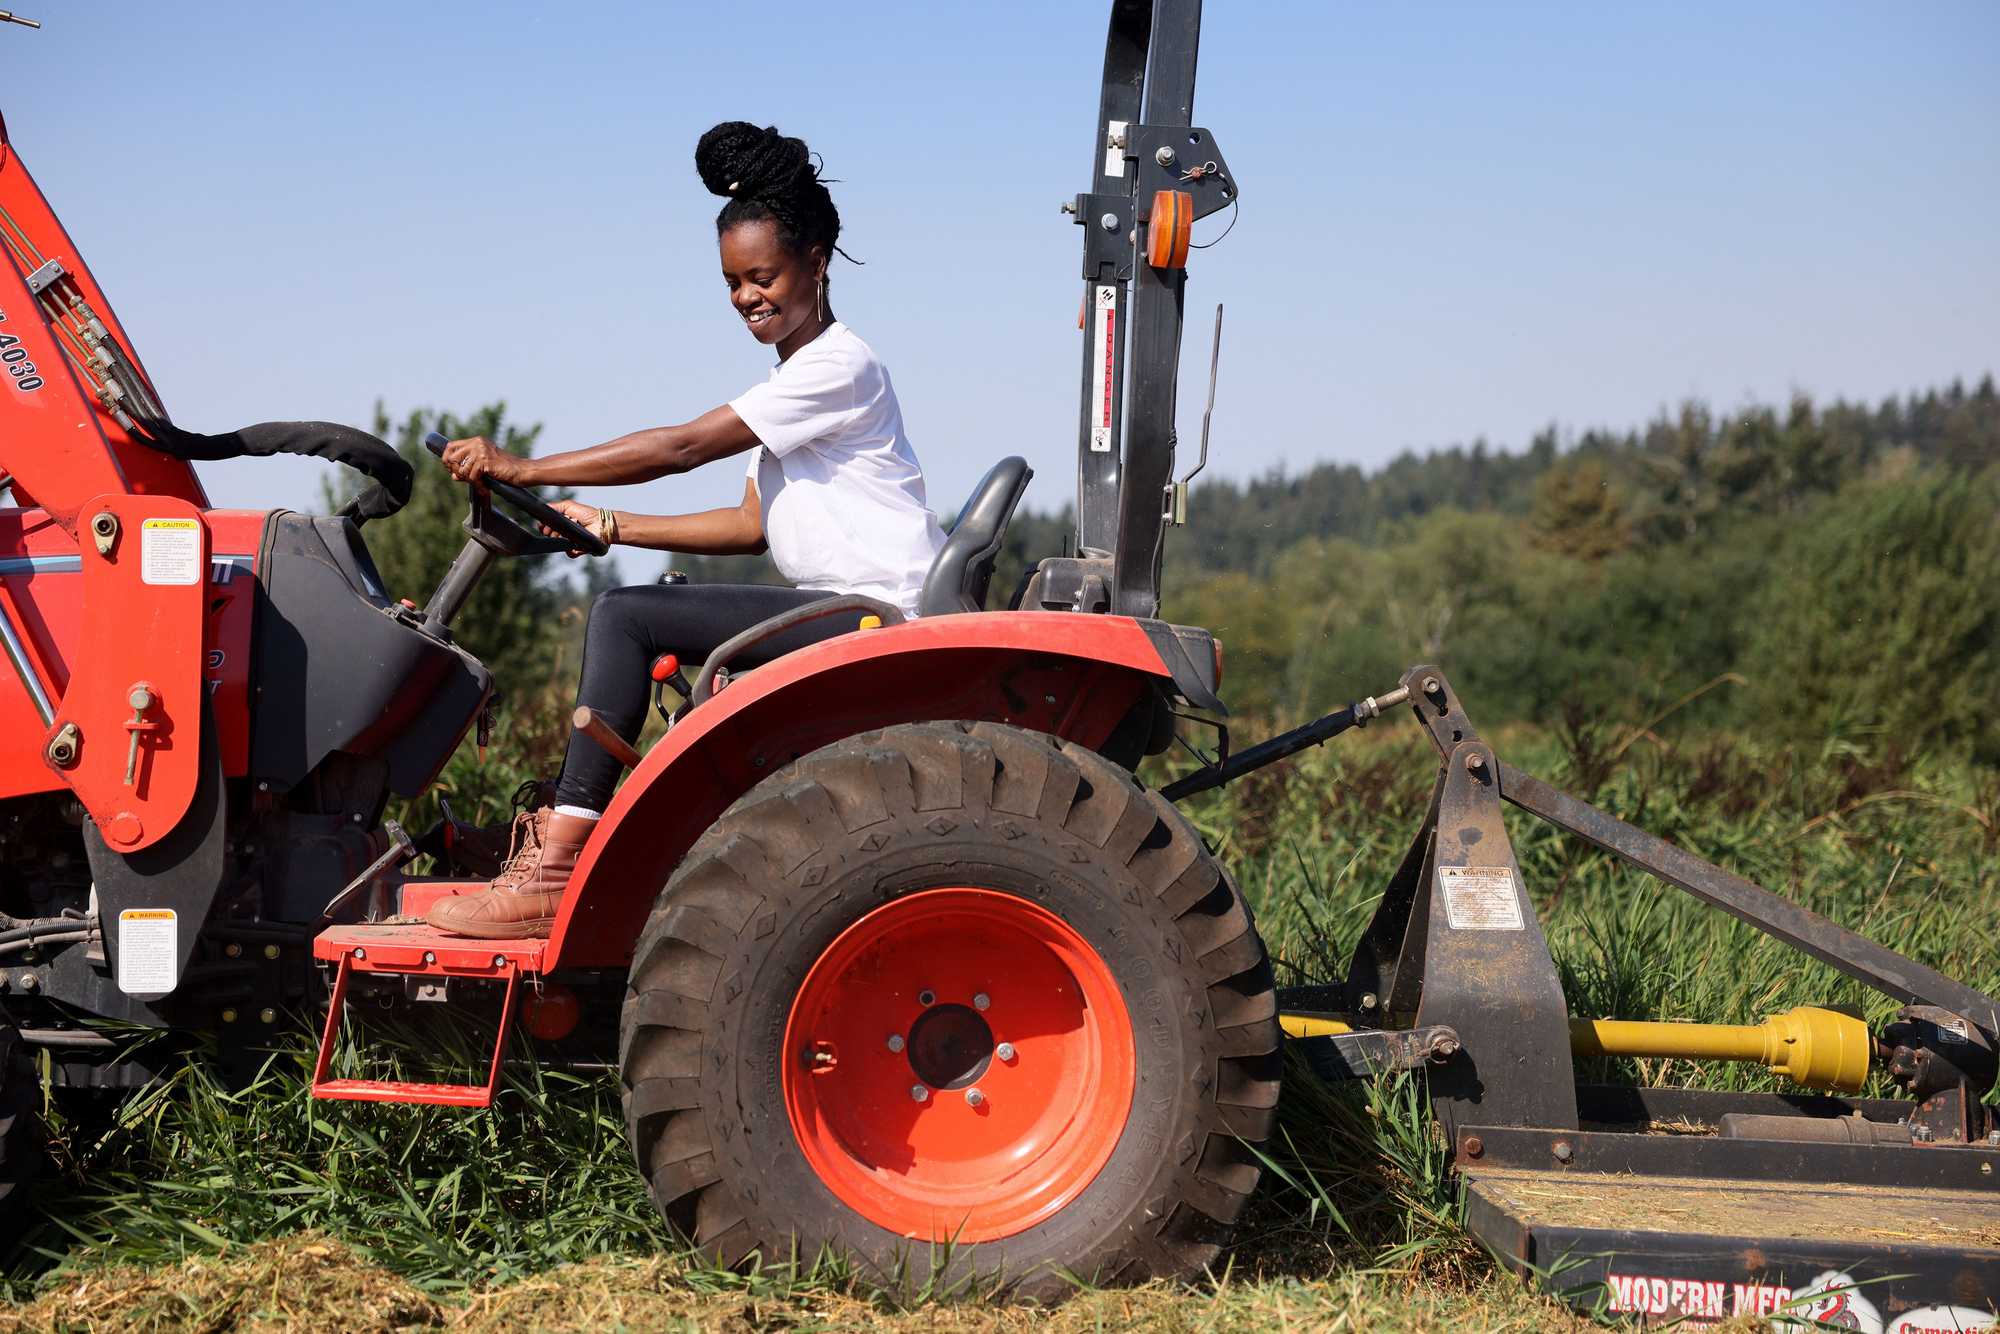 Nyema Clark of Nurturing Roots learned how to drive a tractor on Small Axe Farm, a Black Farmers Collective where new BIPOC farmers can have access to land, infrastructure, business development, and farm training resources. They provide produce to Friendly Hmong Farms for CSA boxes.